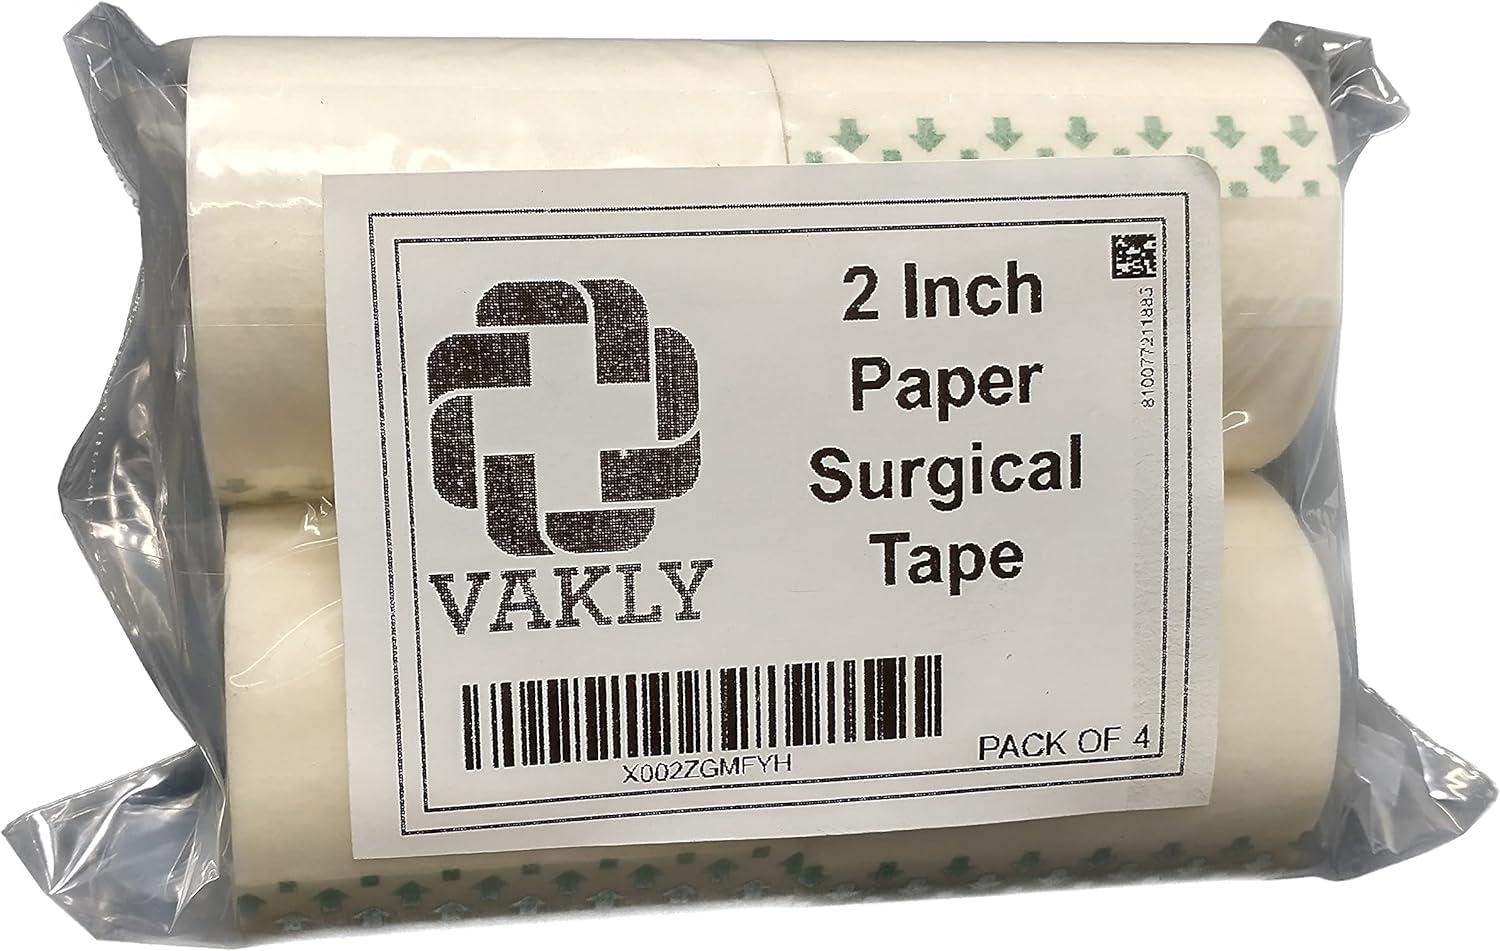 Paper Medical First Aid Surgical Tape 3 x 10 Yards [Pack of 3 Rolls]  Lightweight Breathable Microporous Self Adhesive Latex Free Hypoallergenic